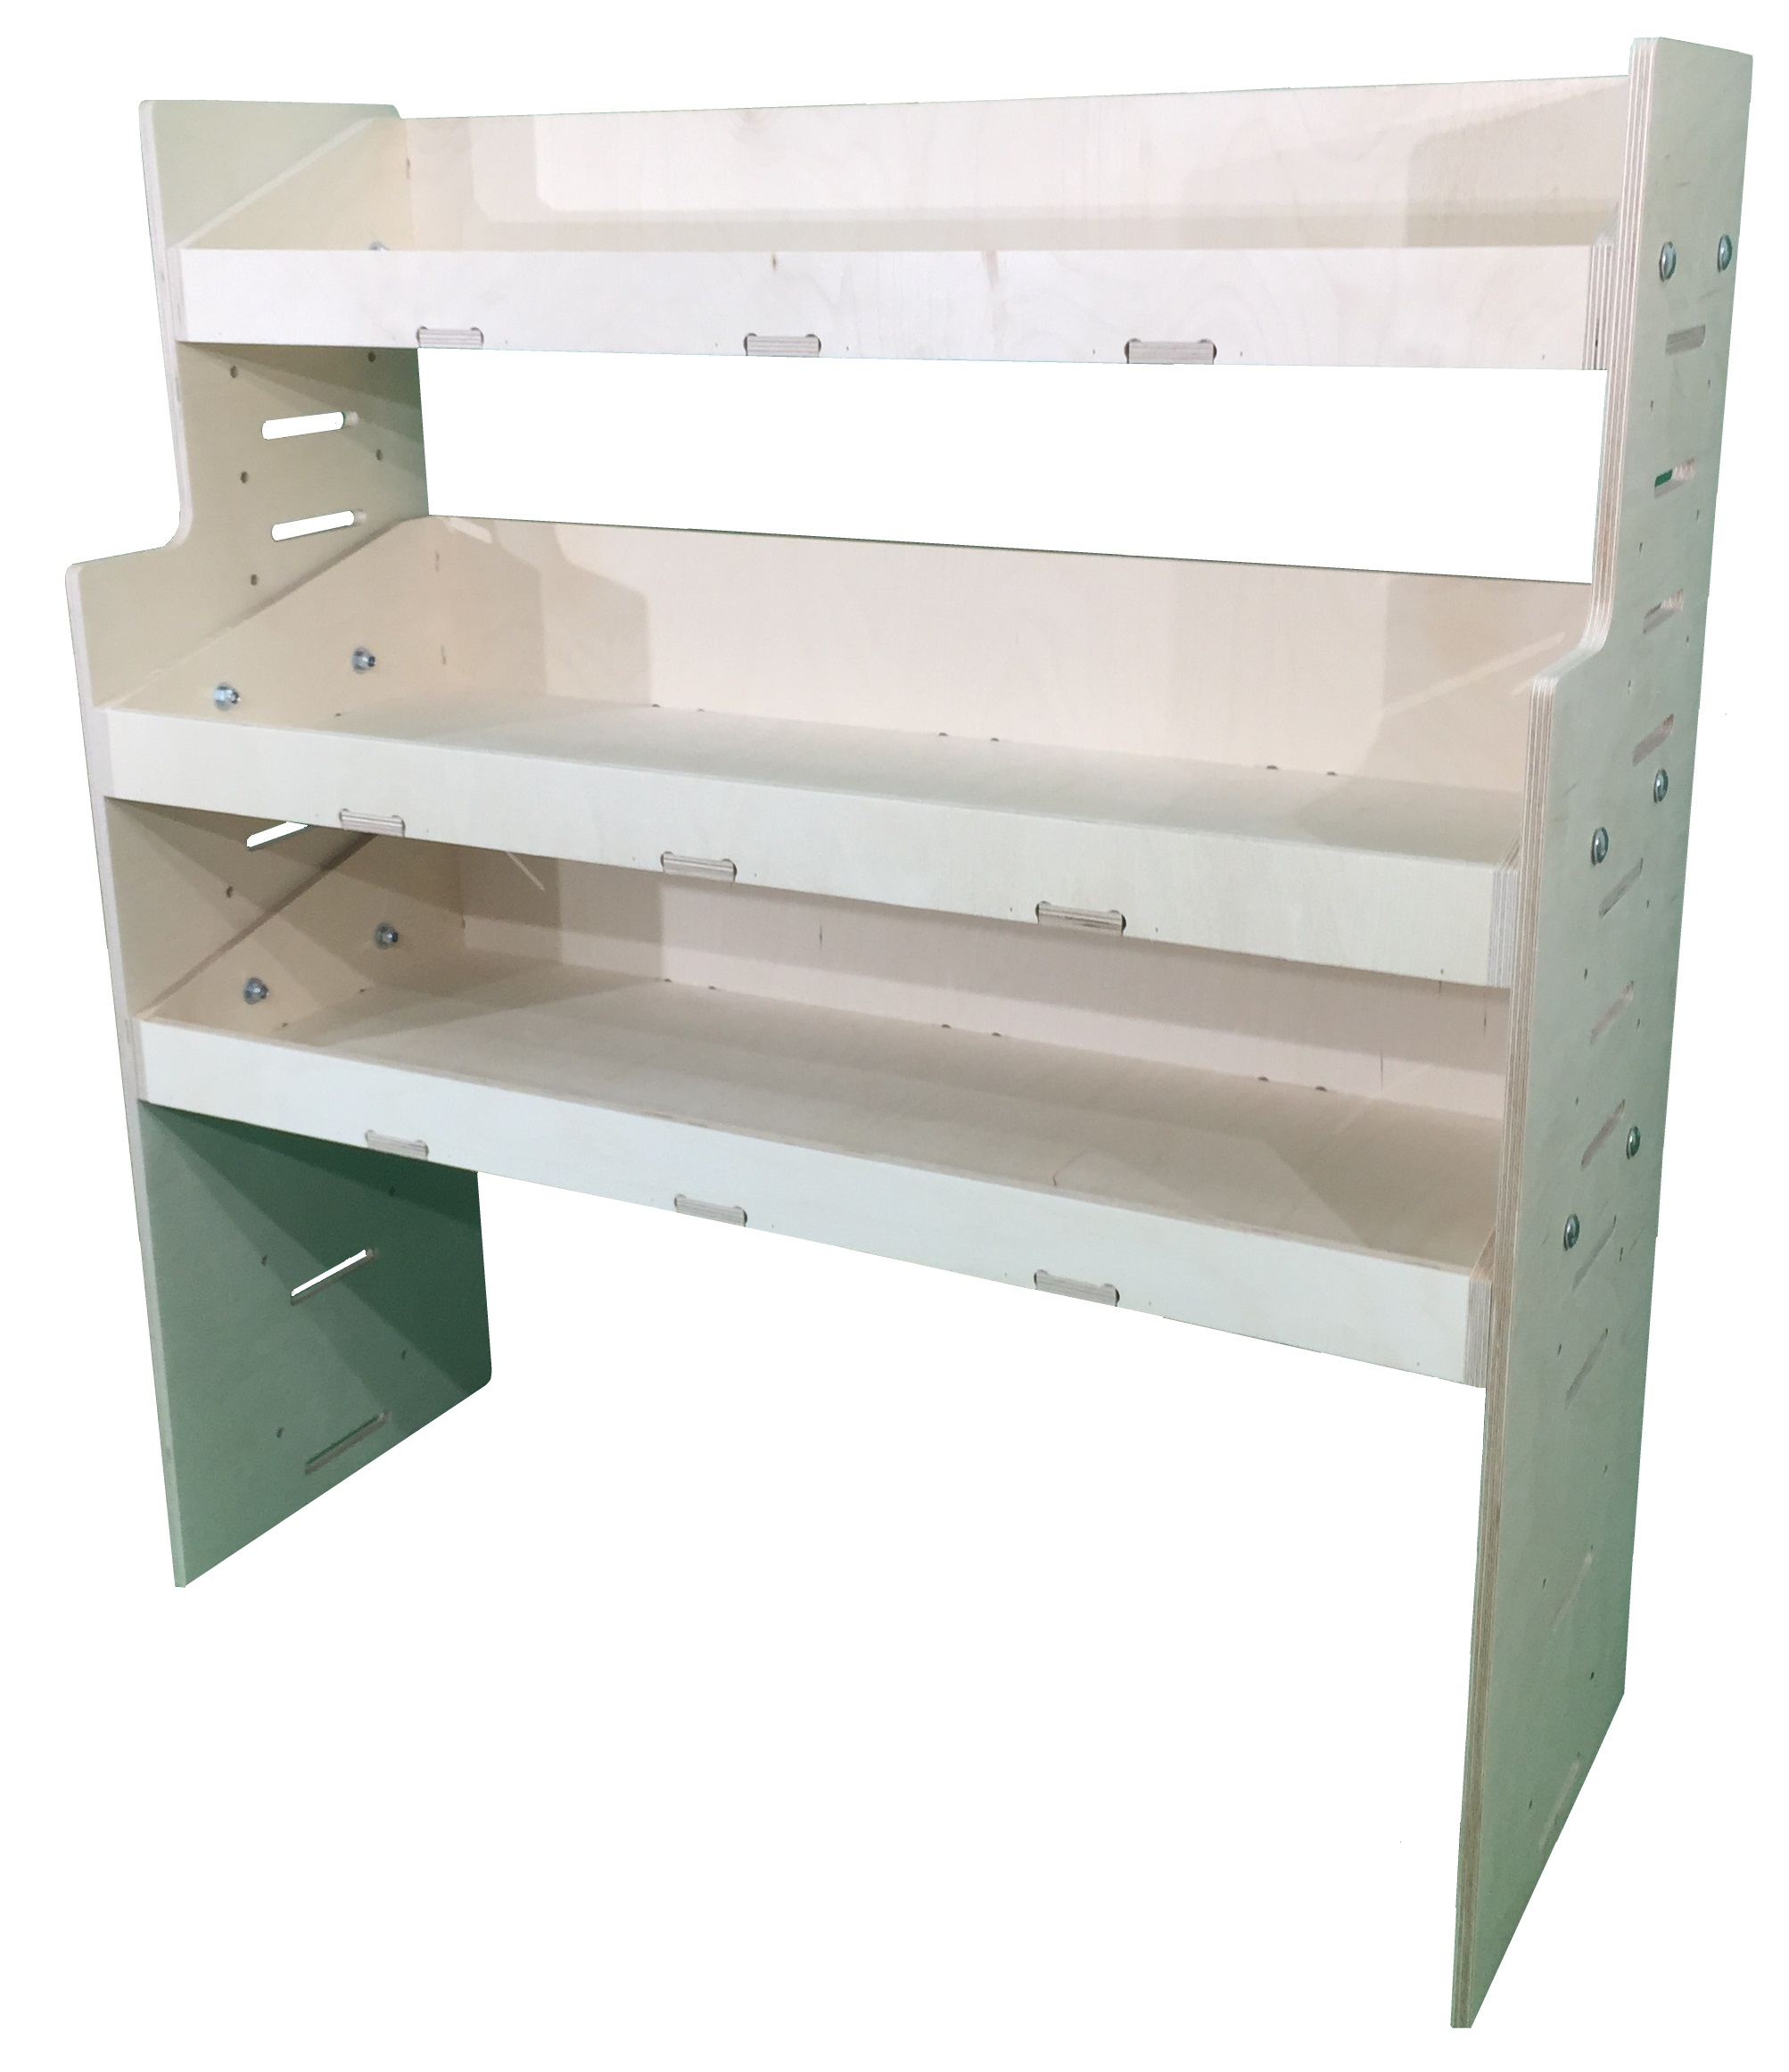 Van Plywood Shelving and Racking Storage System 1087mm(H) x 1000mm(W) x 384mm(D) - BVR1010382261